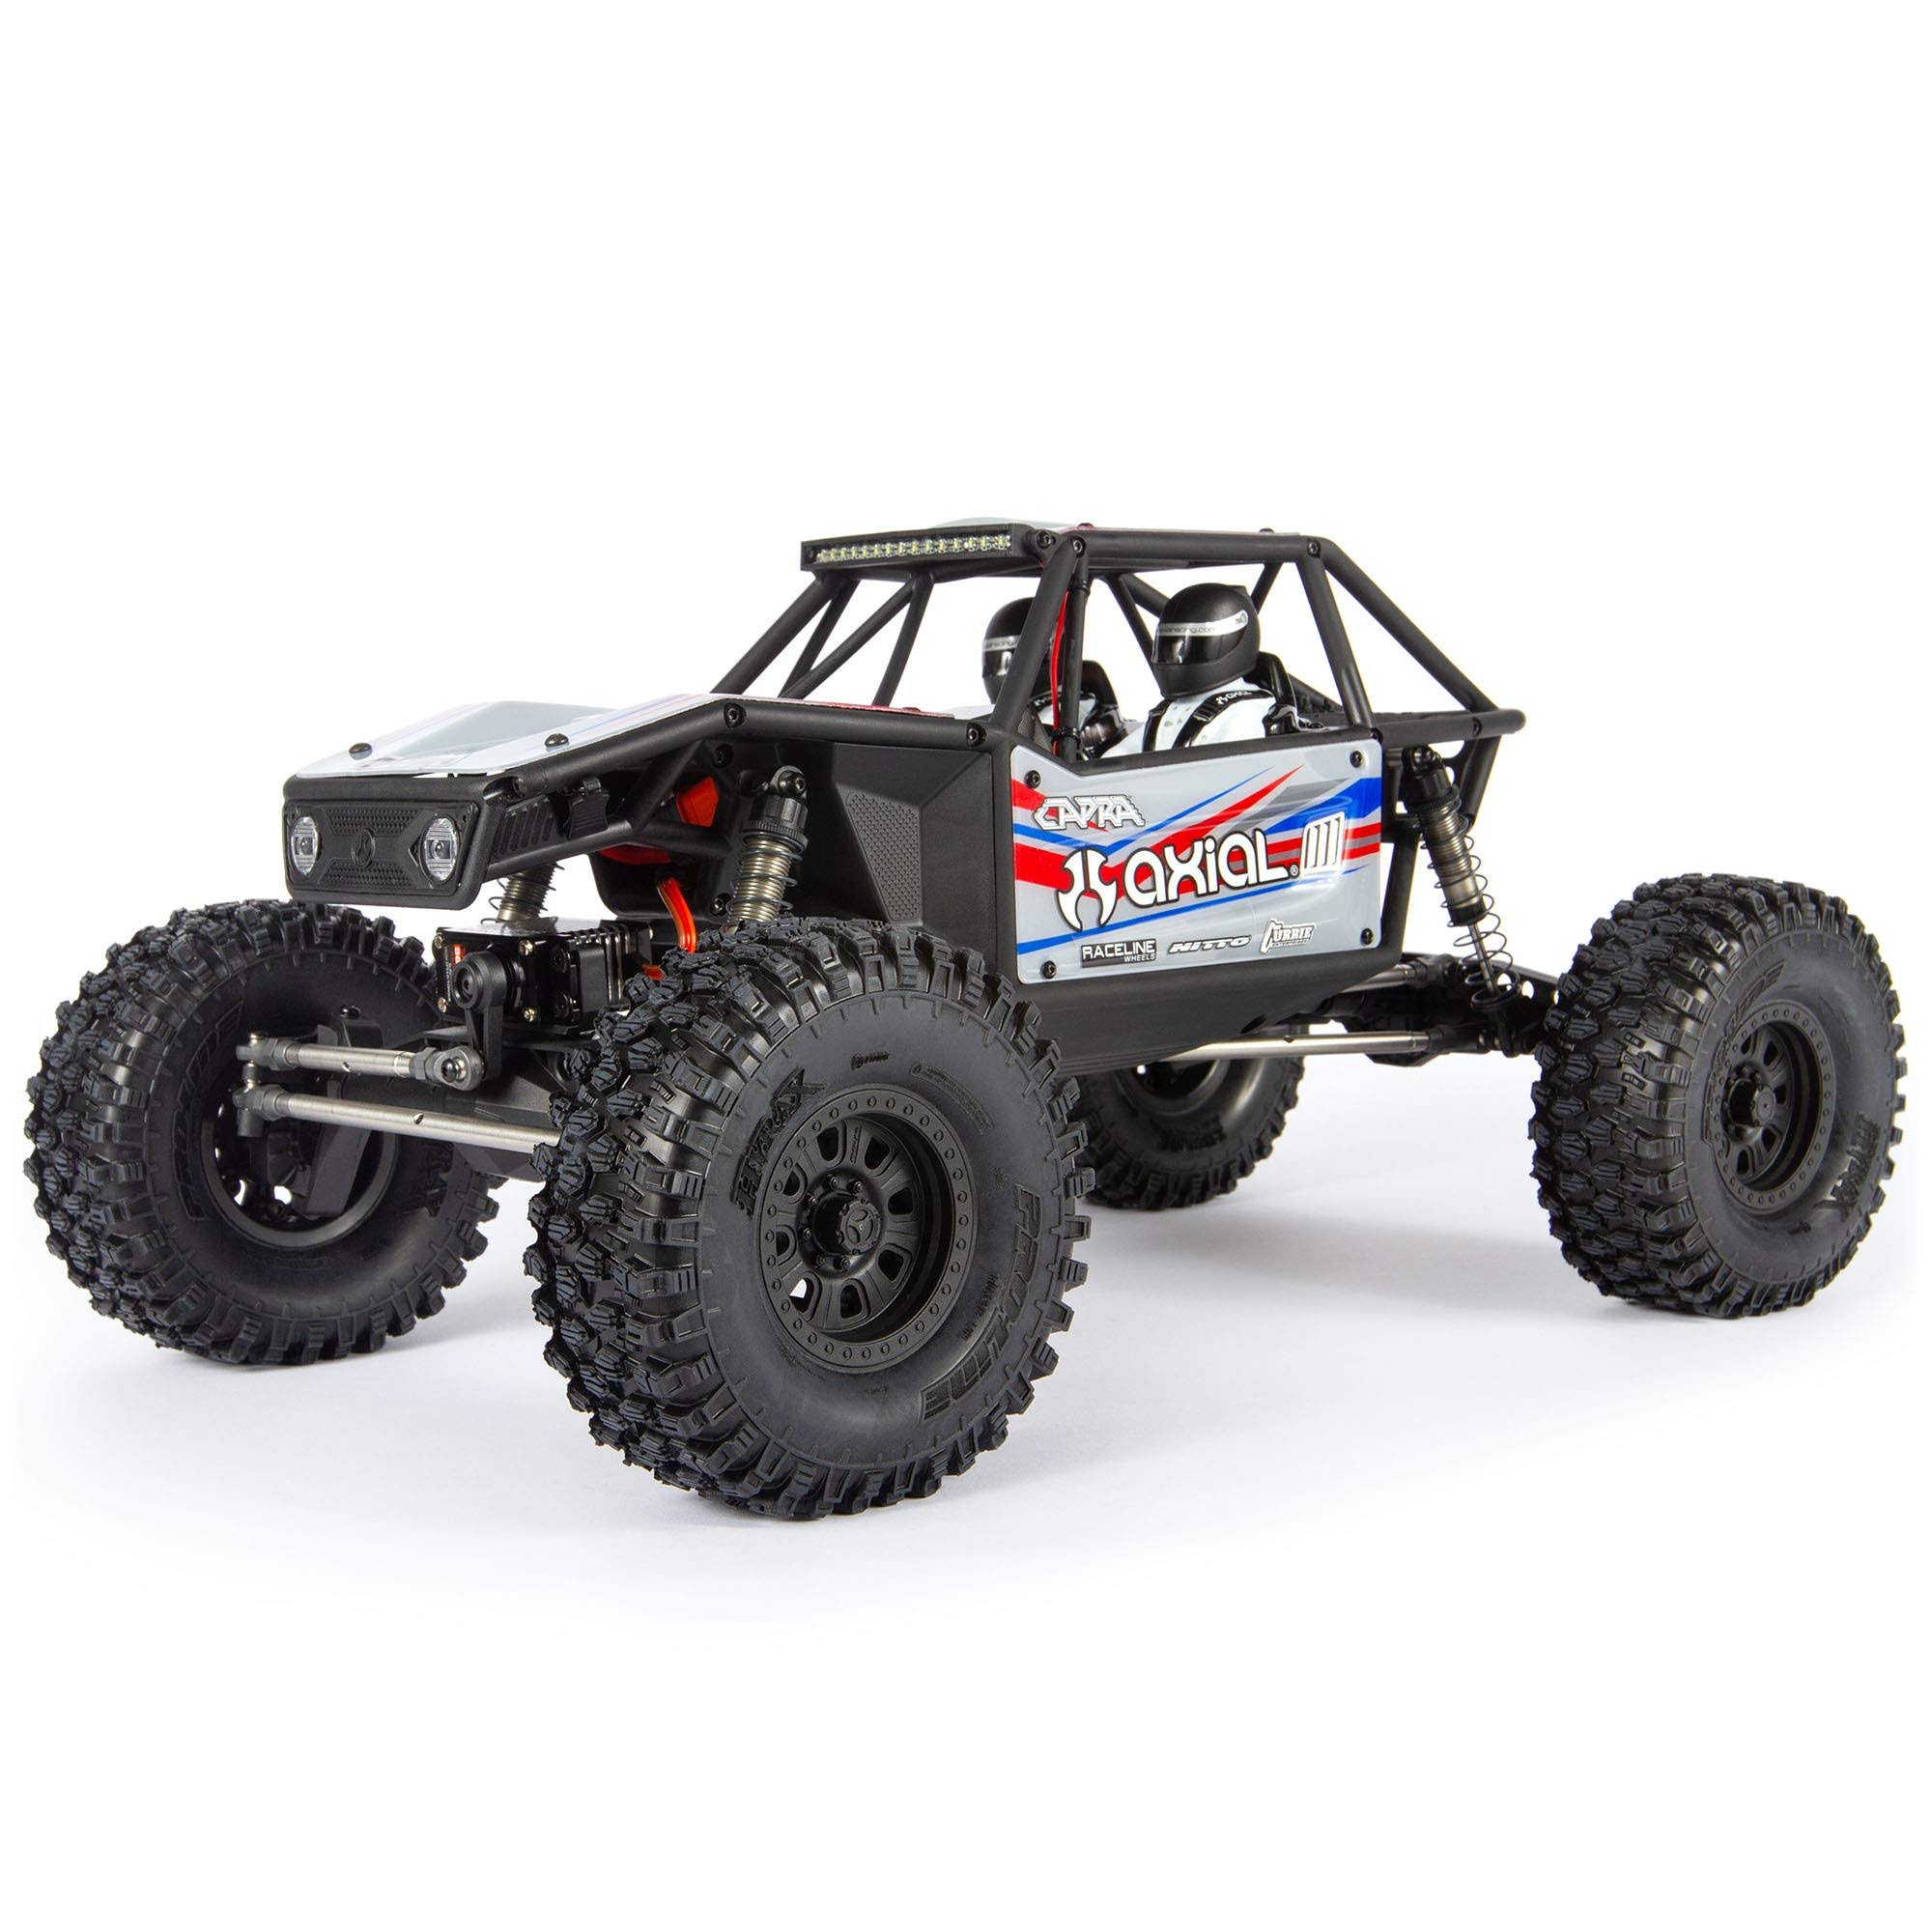 Axial Capra 1.9 Unlimited 4WD Trail Buggy Builder's Toy Kit - Scale 1:10